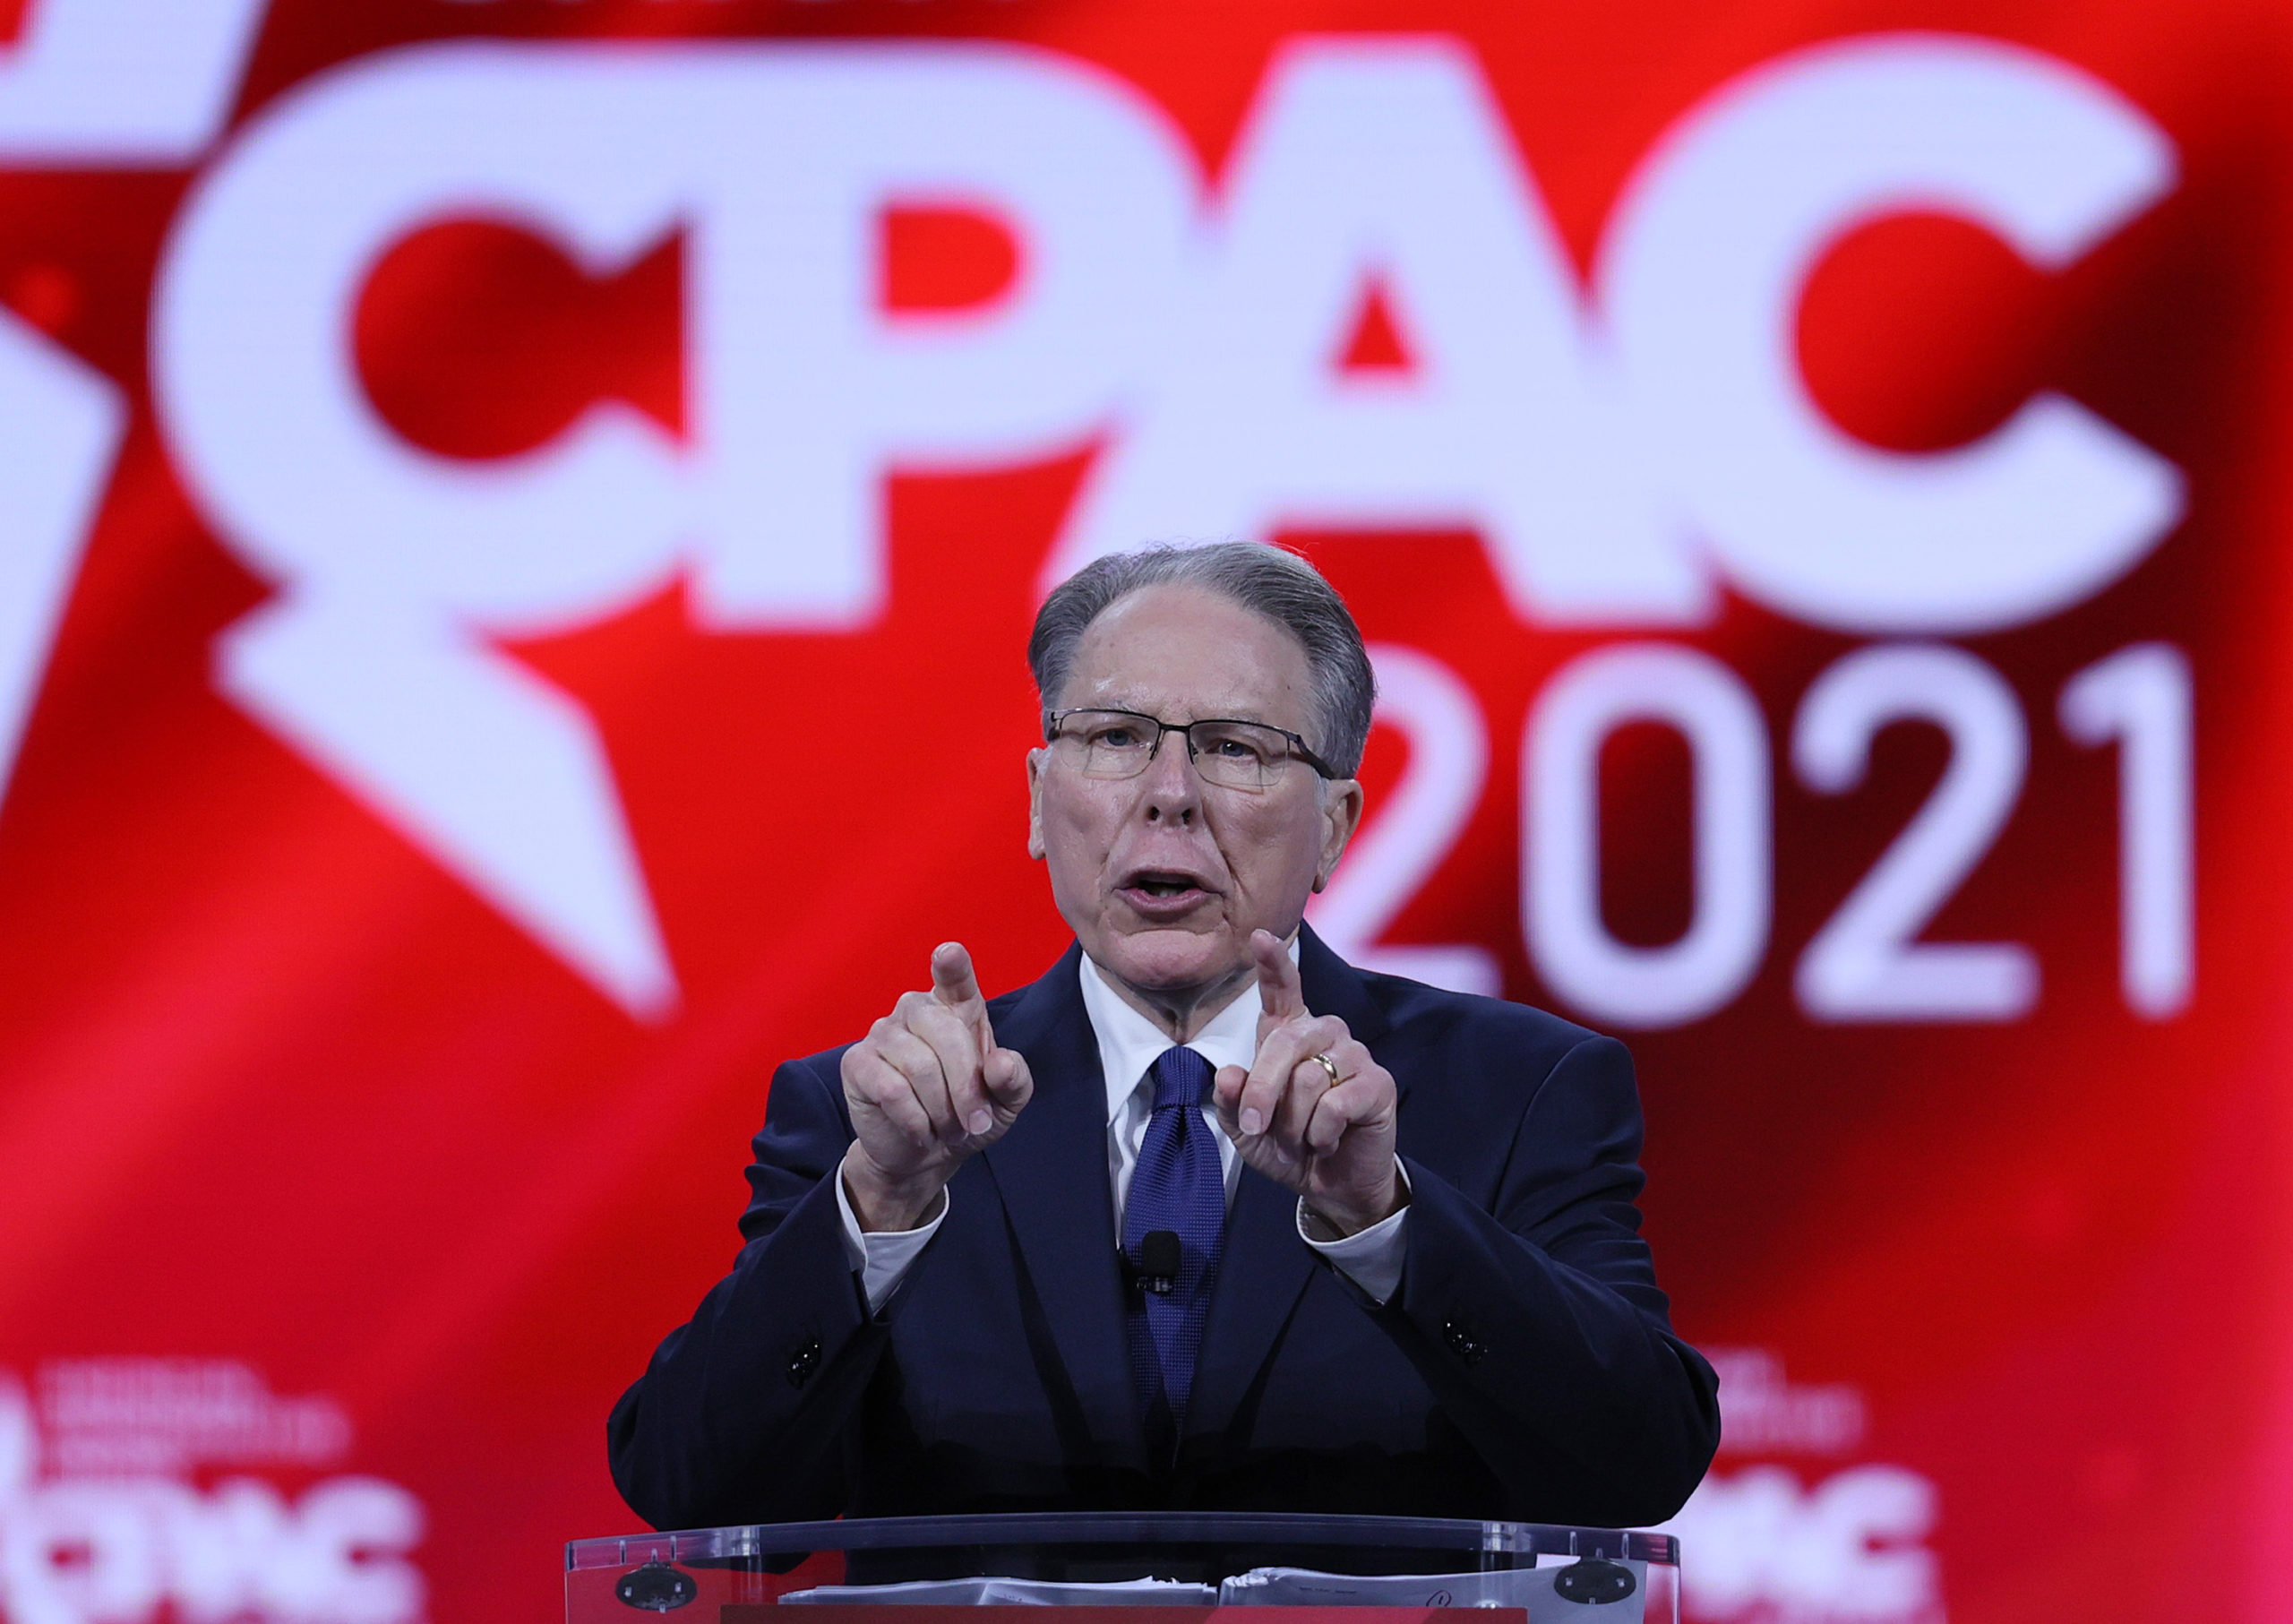 NRA CEO Wayne LaPierre addresses the Conservative Political Action Conference on Feb. 28 in Orlando, Florida. (Joe Raedle/Getty Images)